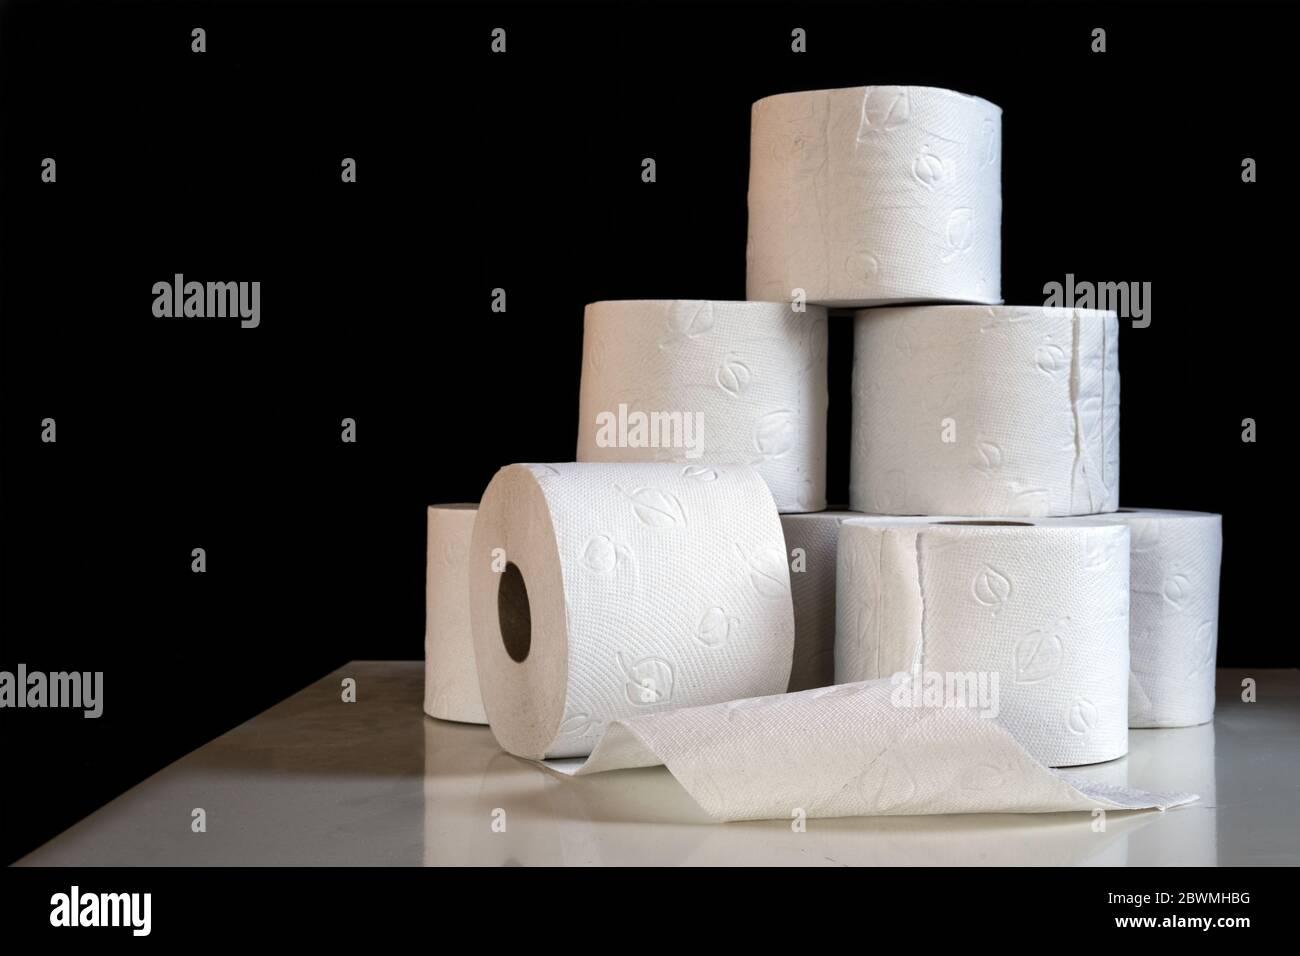 Several rolls of toilet paper, shortage in Germany after shoppers panic buying because of coronavirus pandemic outbreak, dark background with copy spa Stock Photo